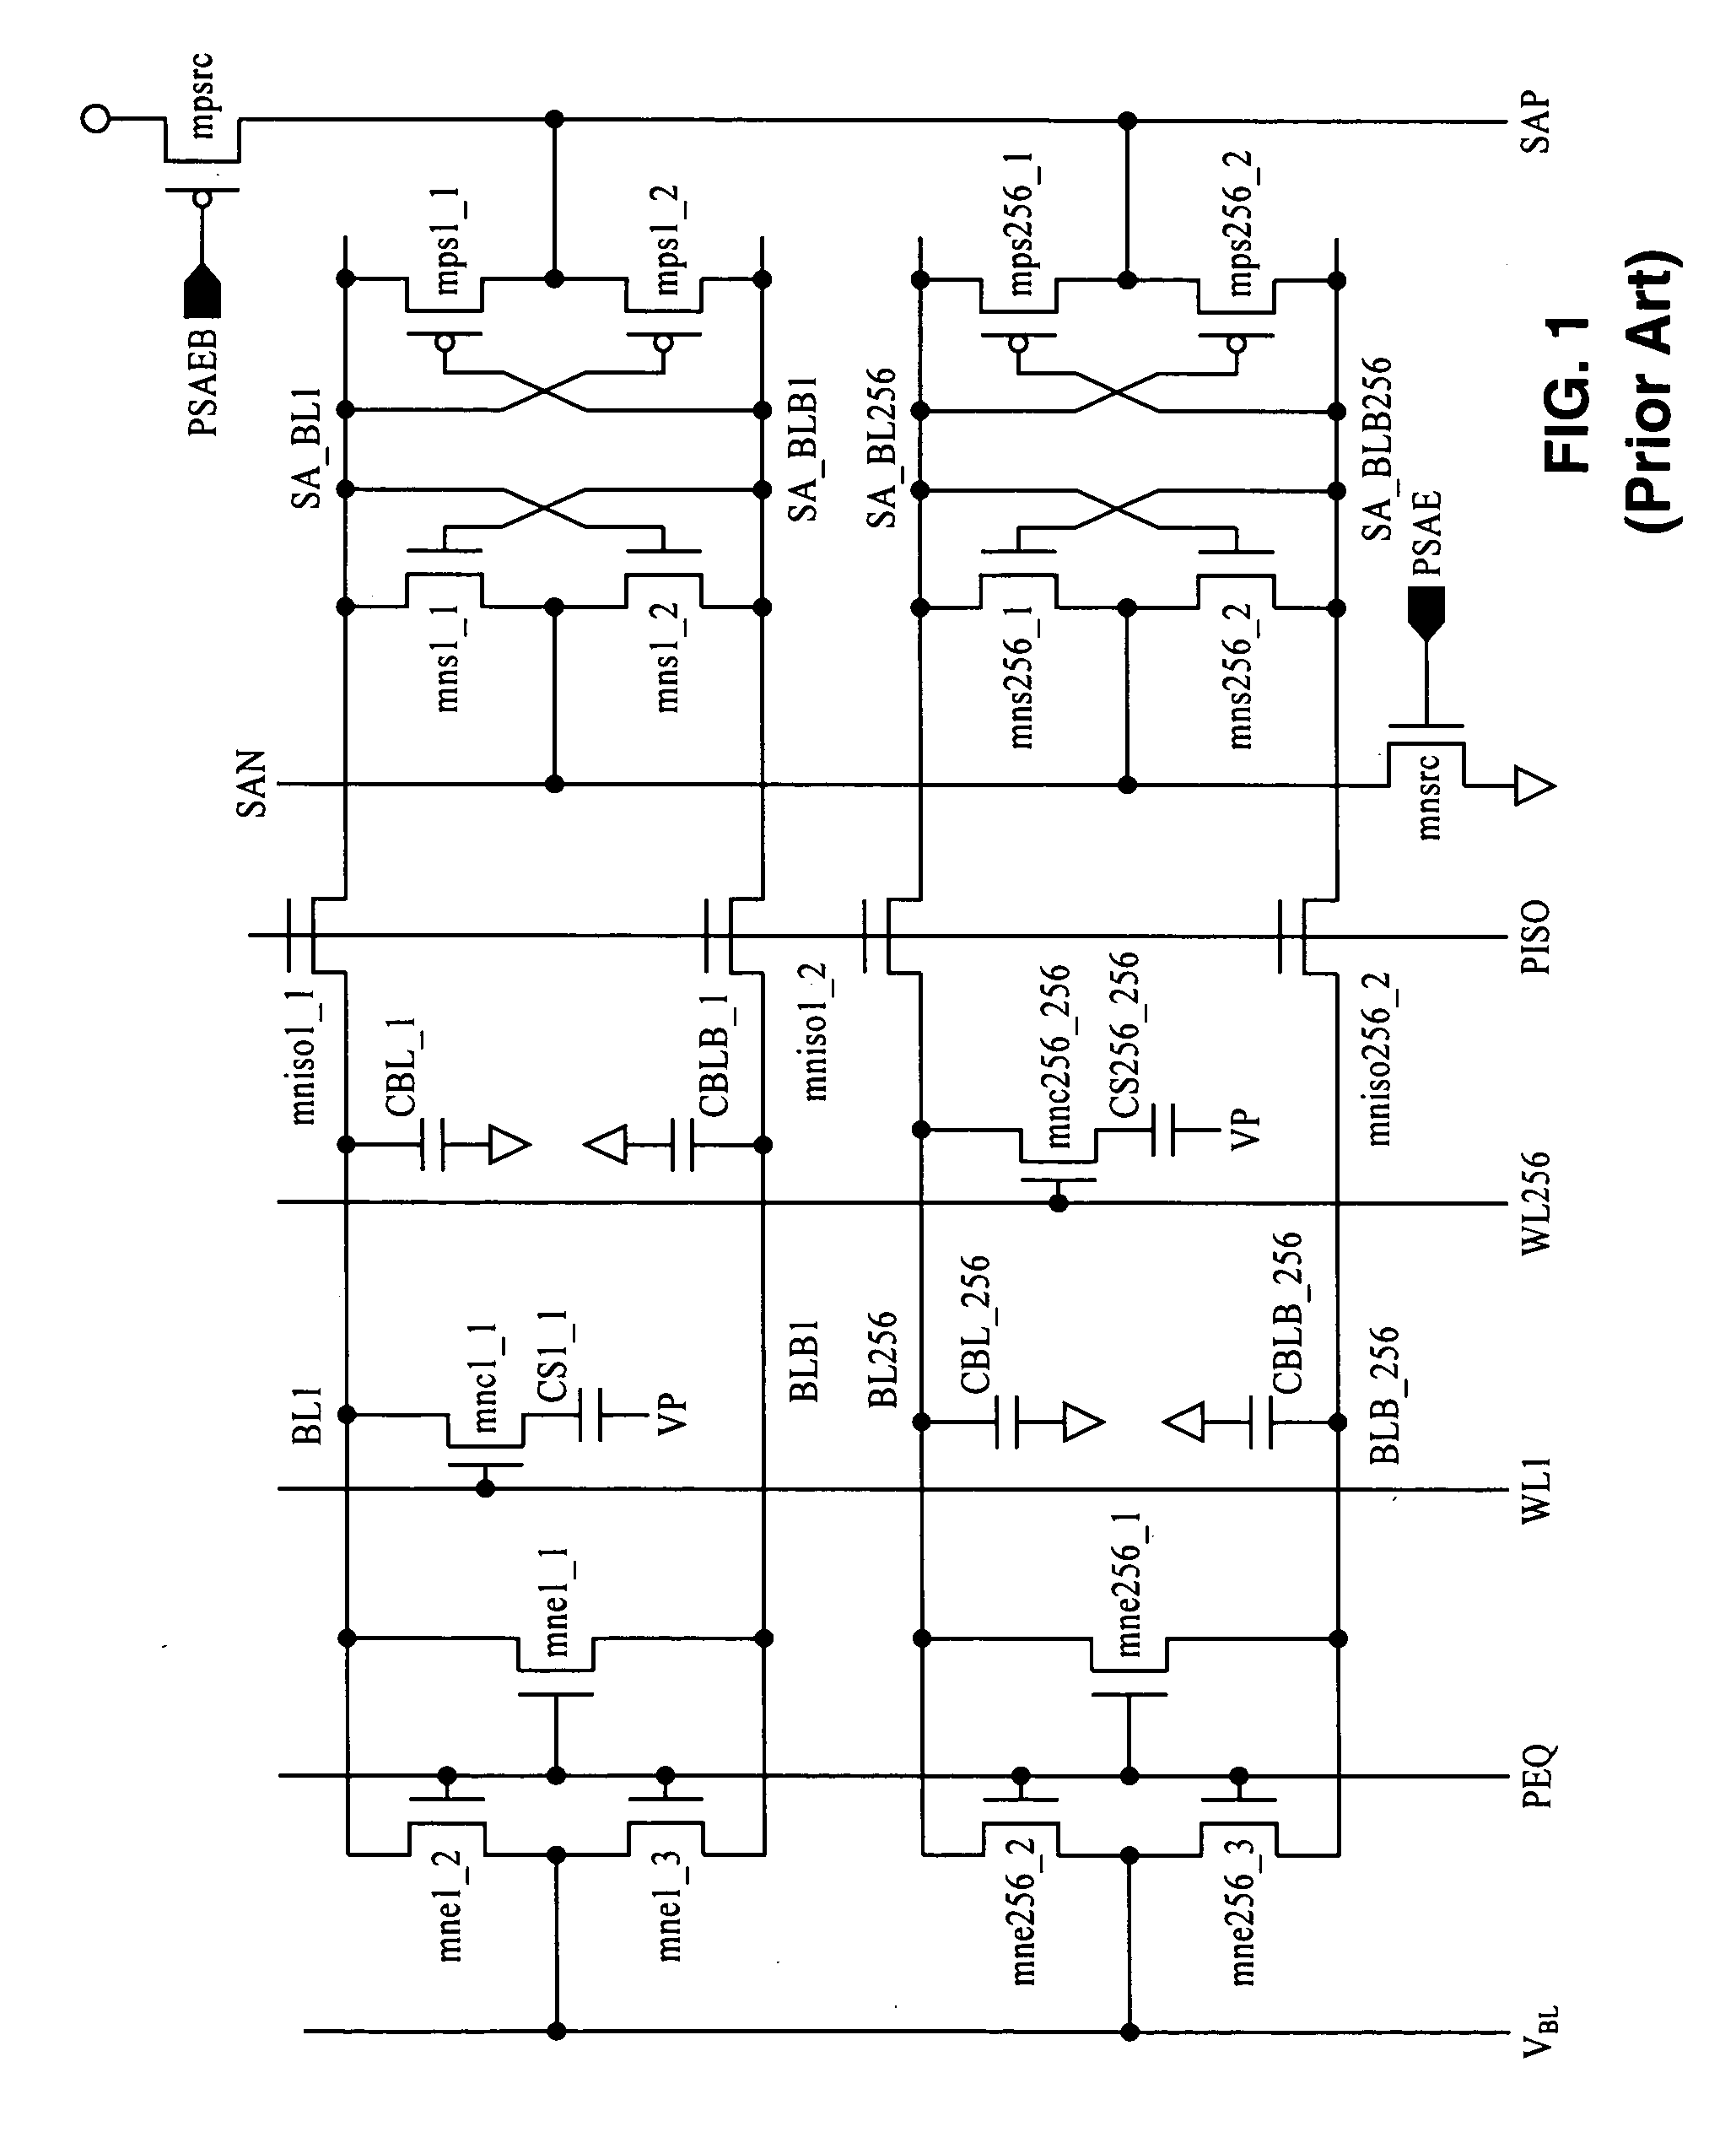 Low voltage operation dram control circuits